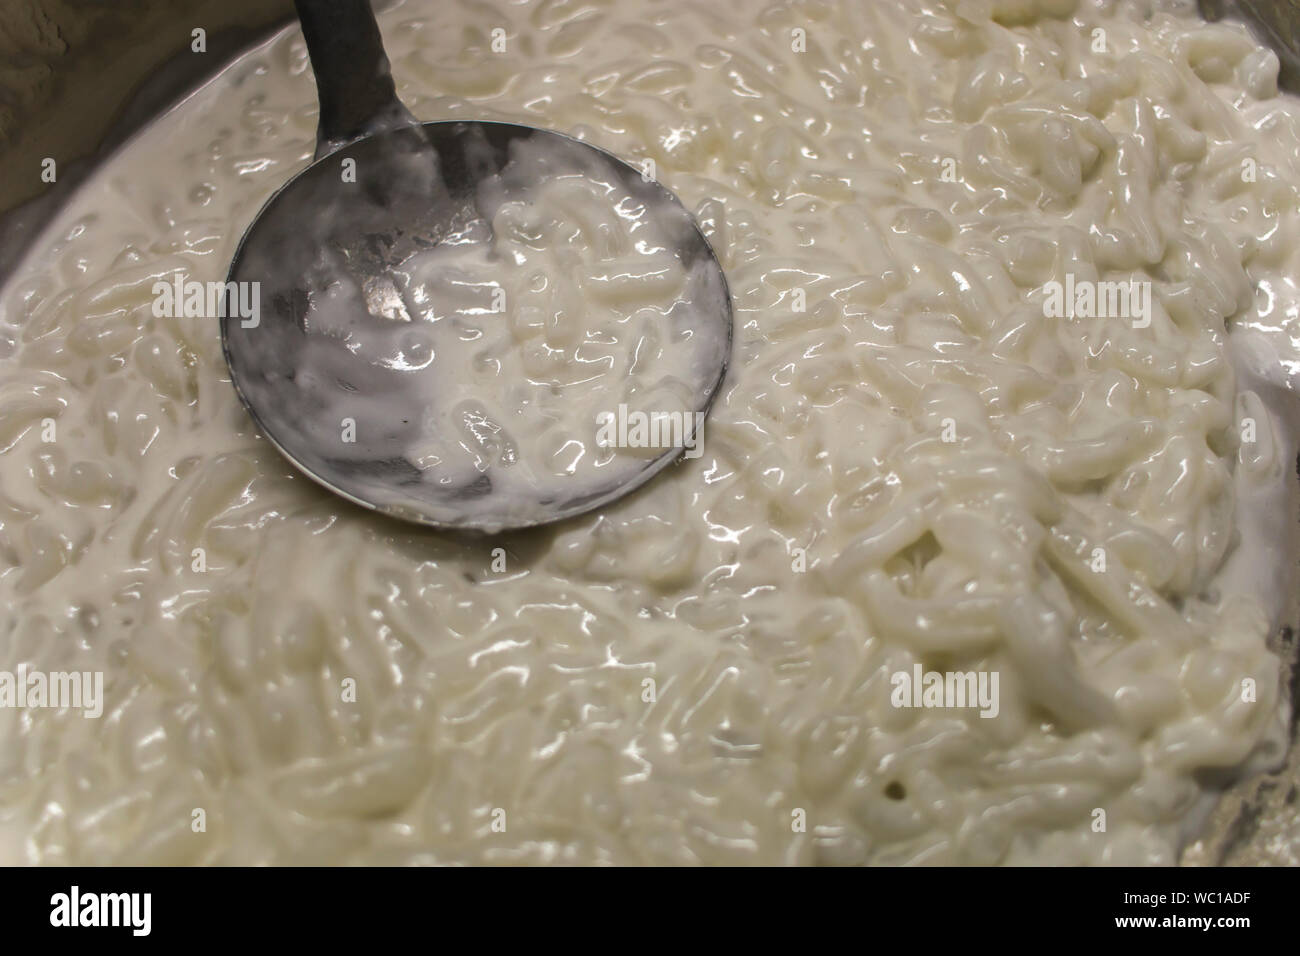 https://c8.alamy.com/comp/WC1ADF/thai-dessert-rice-noodles-made-of-rice-eaten-with-coconut-milk-in-the-big-pot-prepare-for-sell-in-market-high-resolution-image-gallery-WC1ADF.jpg